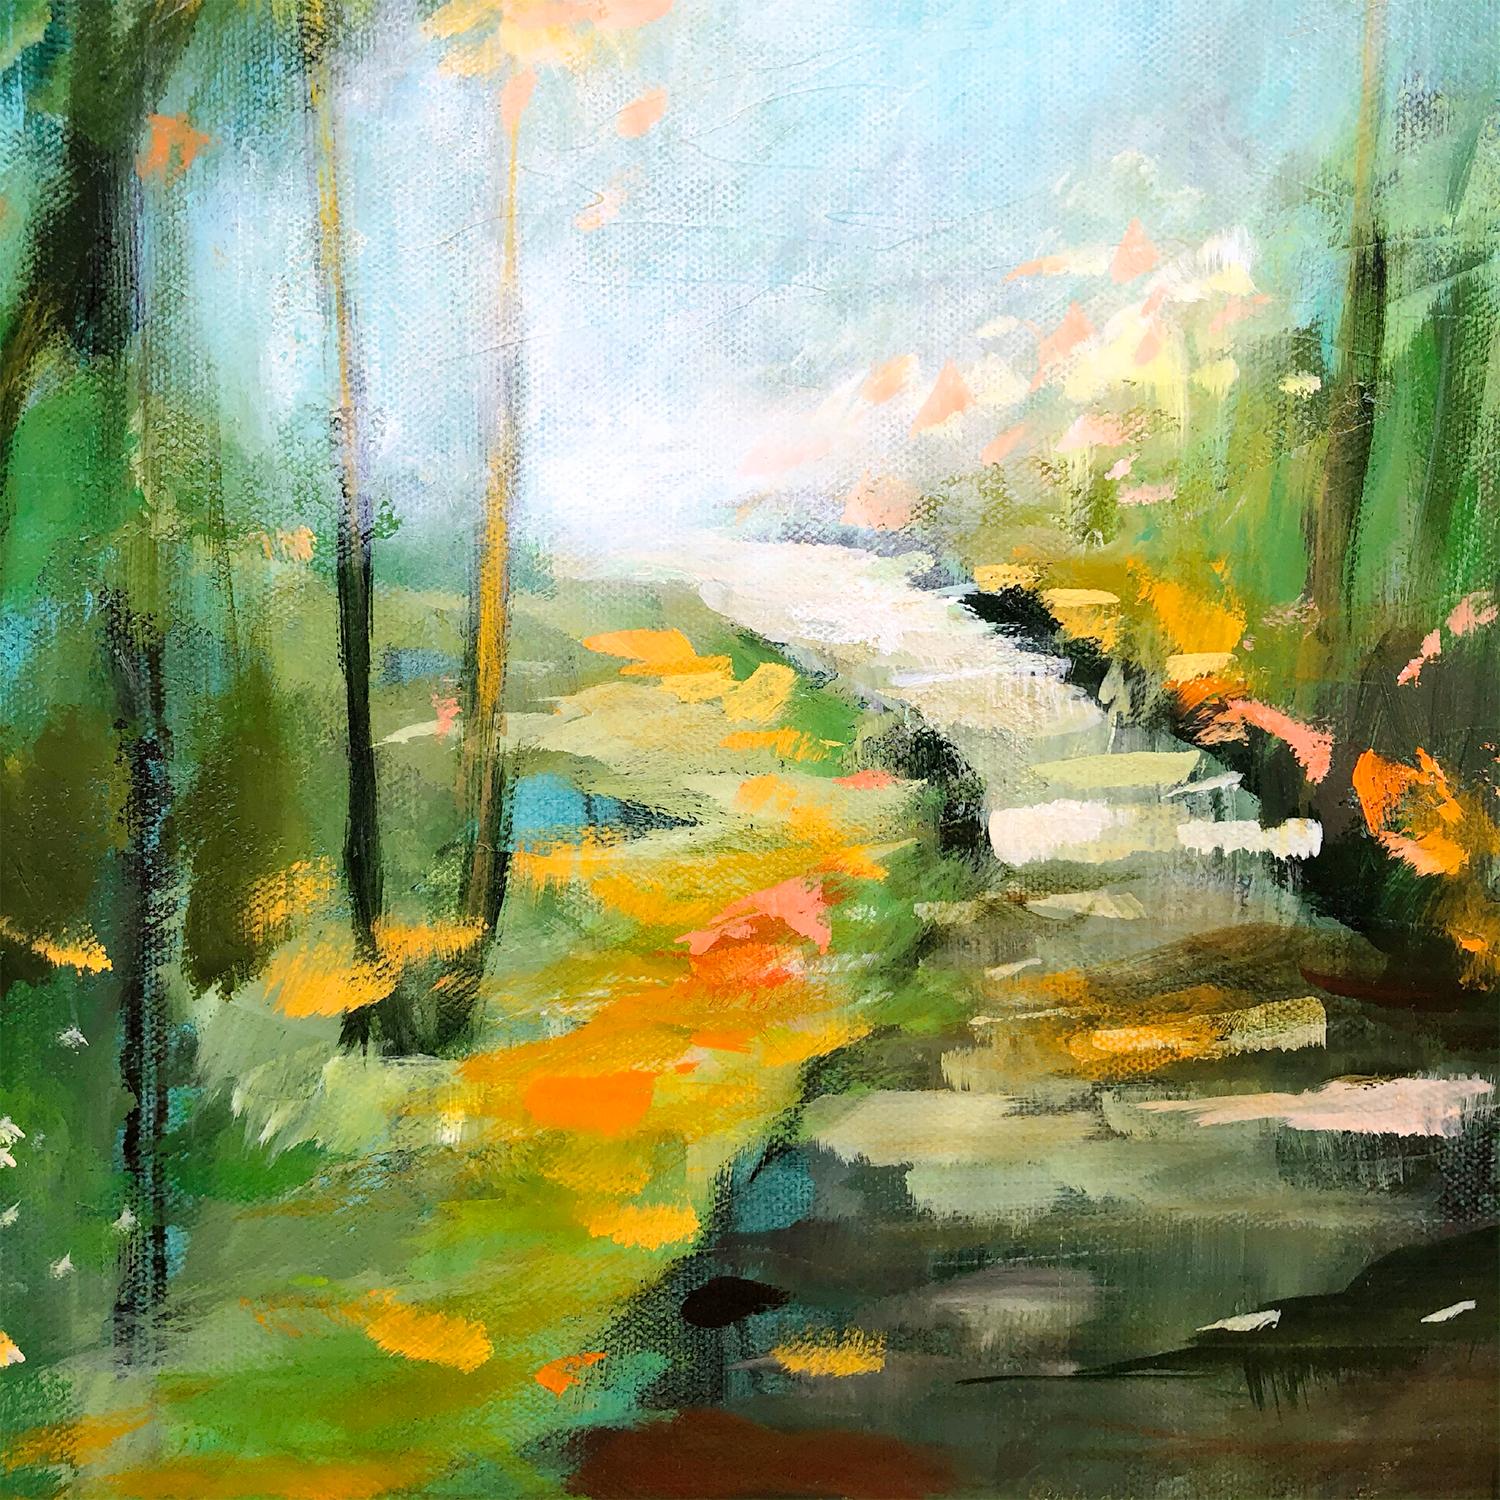 Candy Corn Woods, Original Painting - Abstract Impressionist Art by Drew Noel Marin